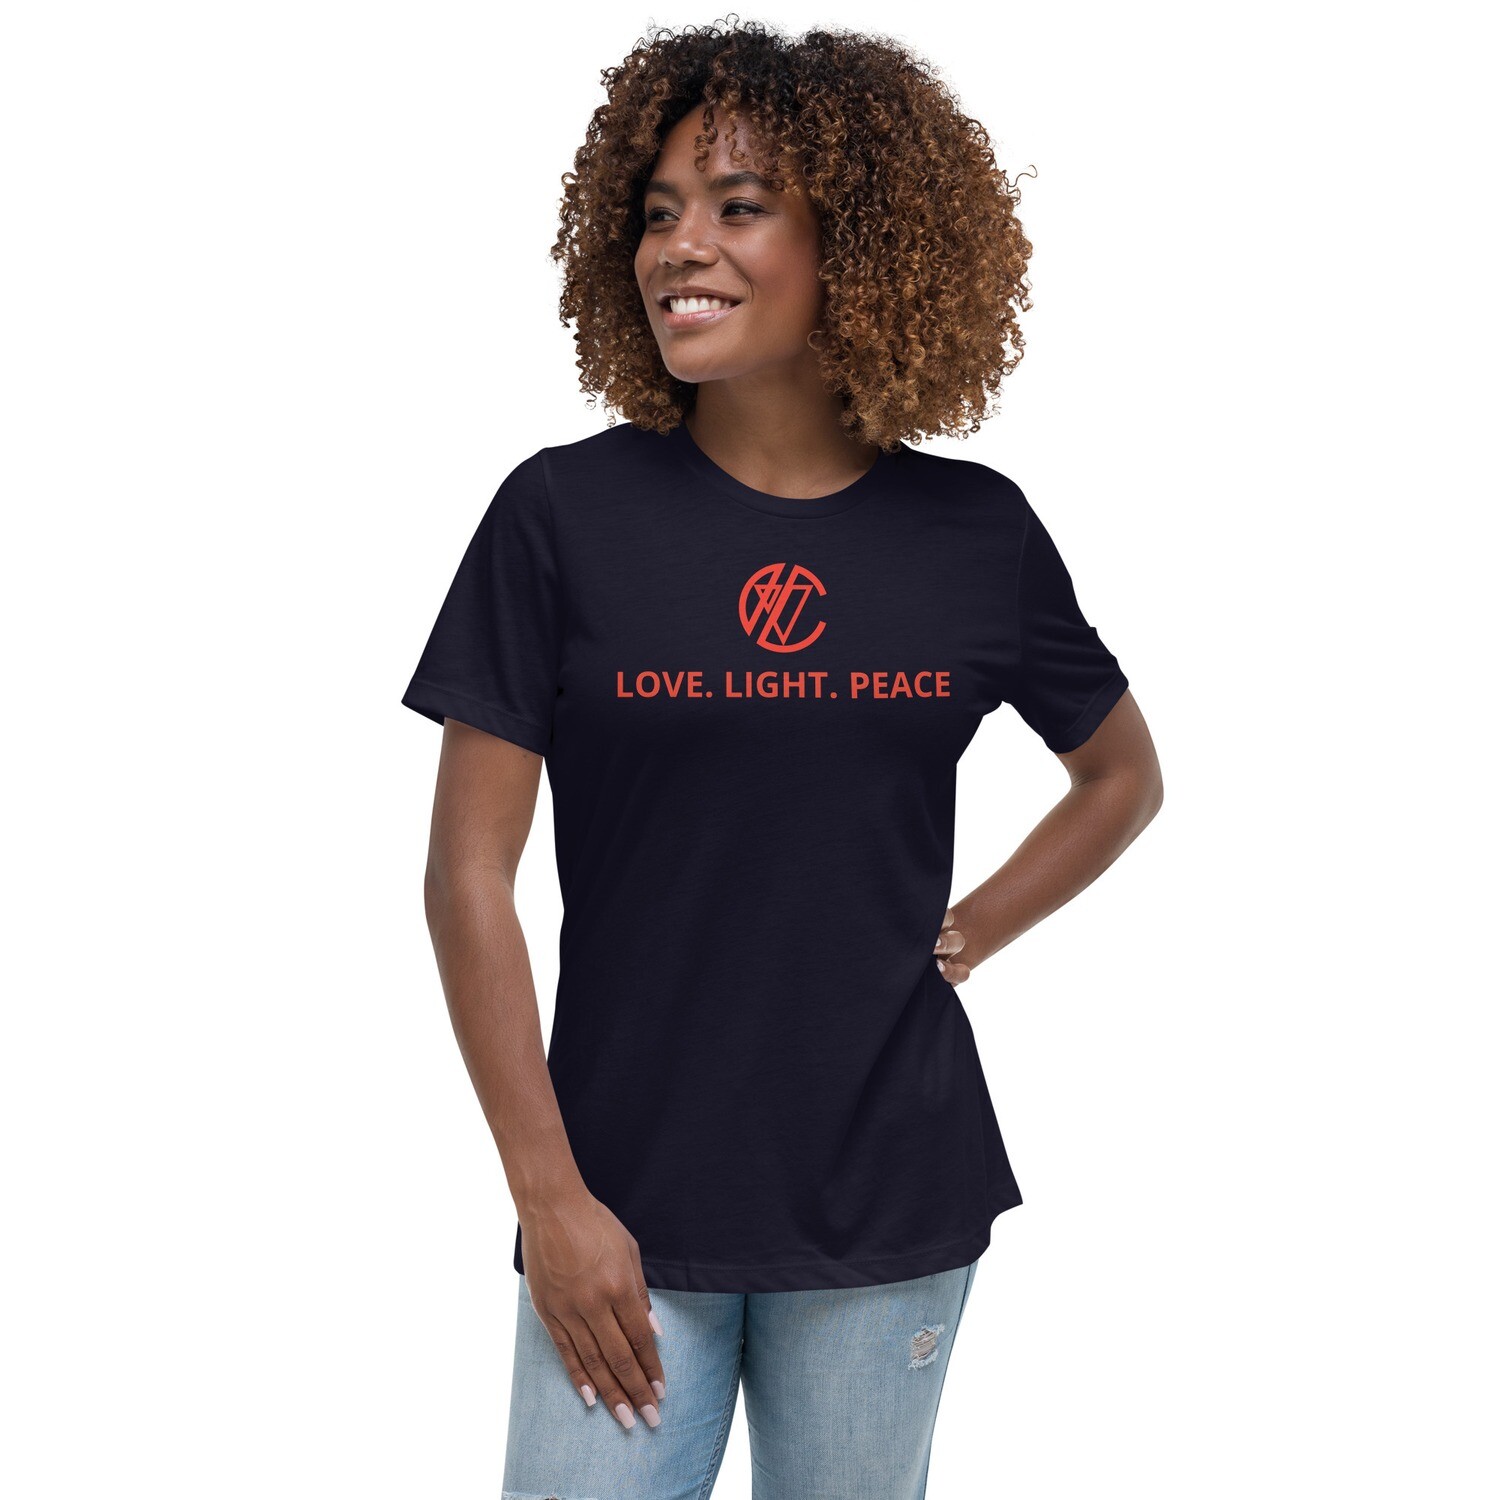 Verona's Closet Love . Light And Peace Women's Relaxed Fit T-Shirt